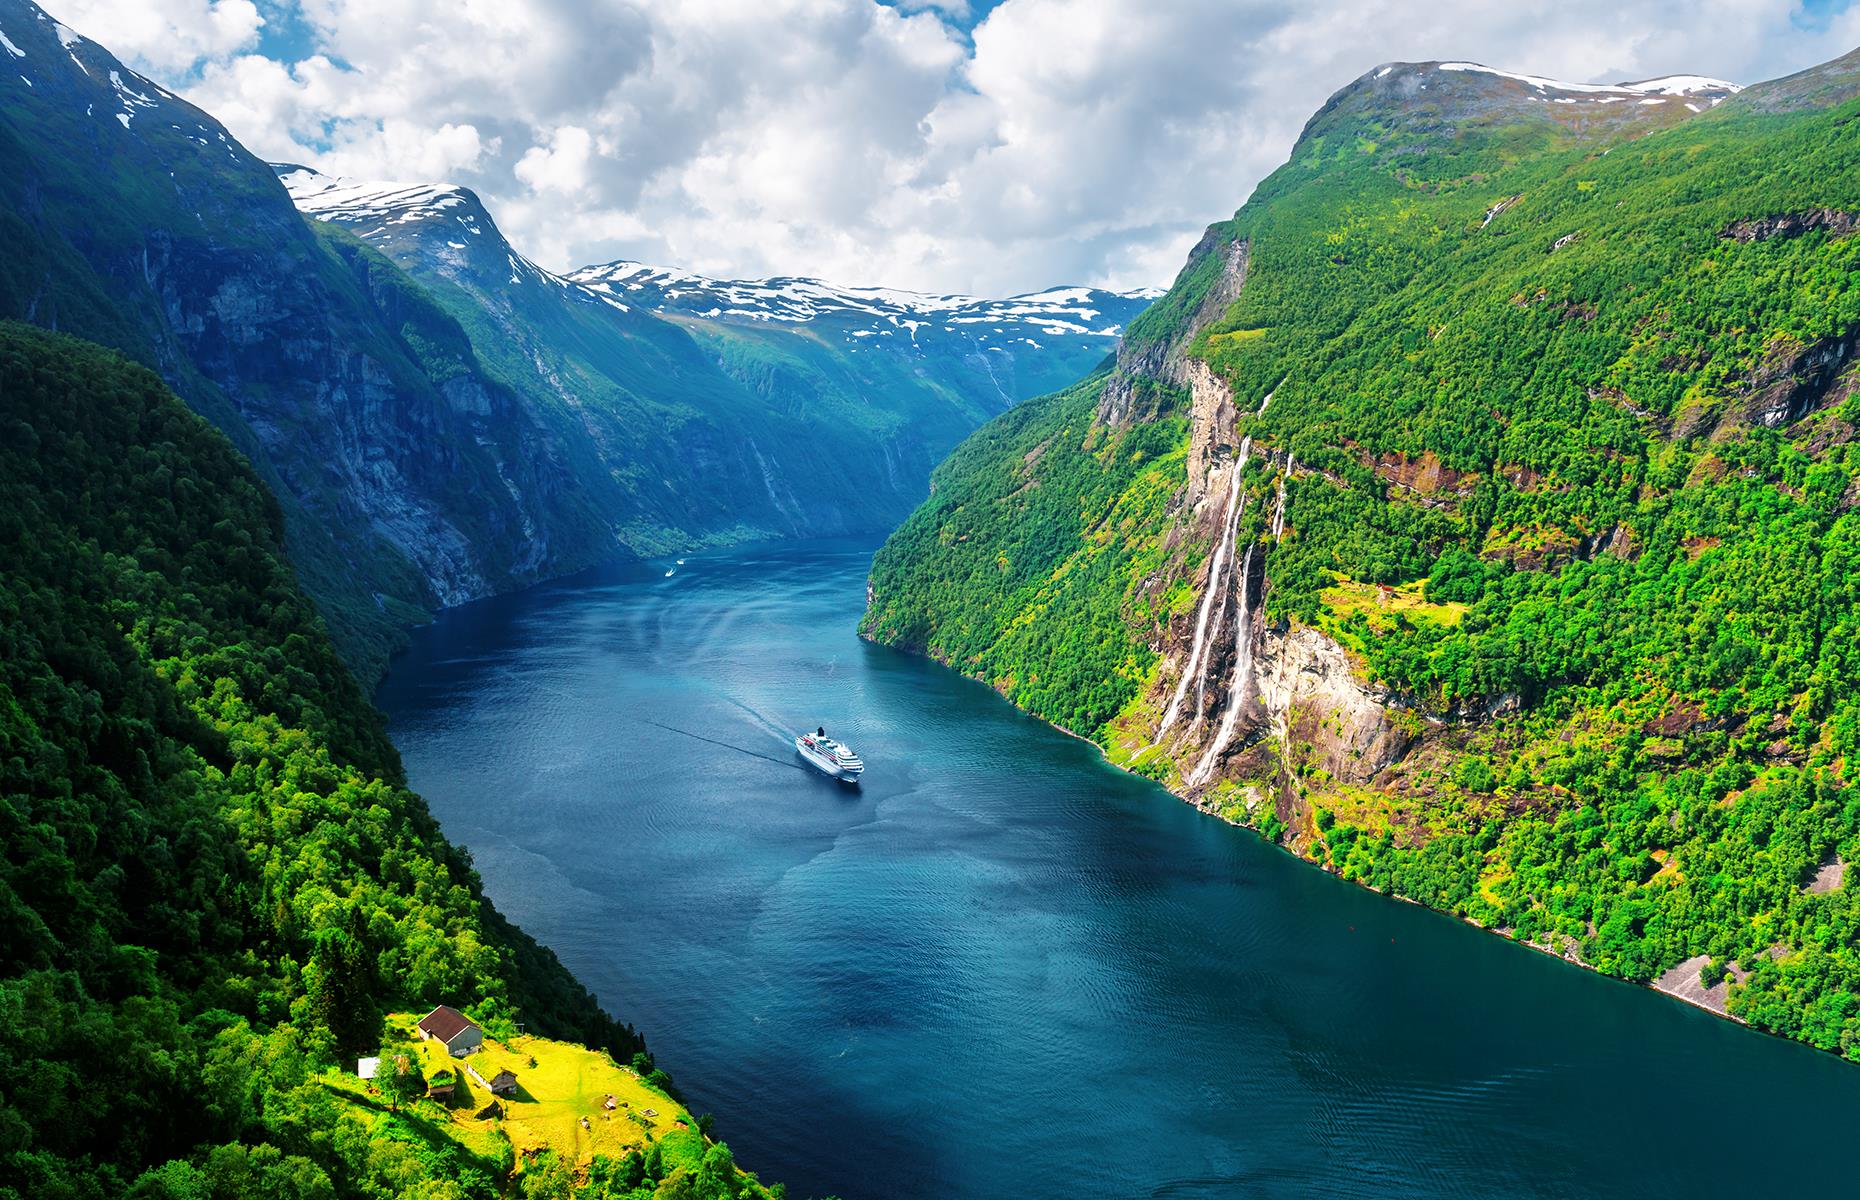 <p>Get out on deck to marvel at Norway’s rearing, rugged coastline. Cruise ships ply the network of fjords, past spectacular waterfalls, steep mountainsides and – with a bit of luck – schools of dolphins, porpoises and whales. The gushing cascades of UNESCO-listed Geirangerfjord, one of the western fjords, should be top of your list.</p>  <p><a href="https://www.loveexploring.com/galleries/170004/ranked-europes-finest-family-attractions?page=1"><strong>Europe's finest family attractions</strong></a></p>